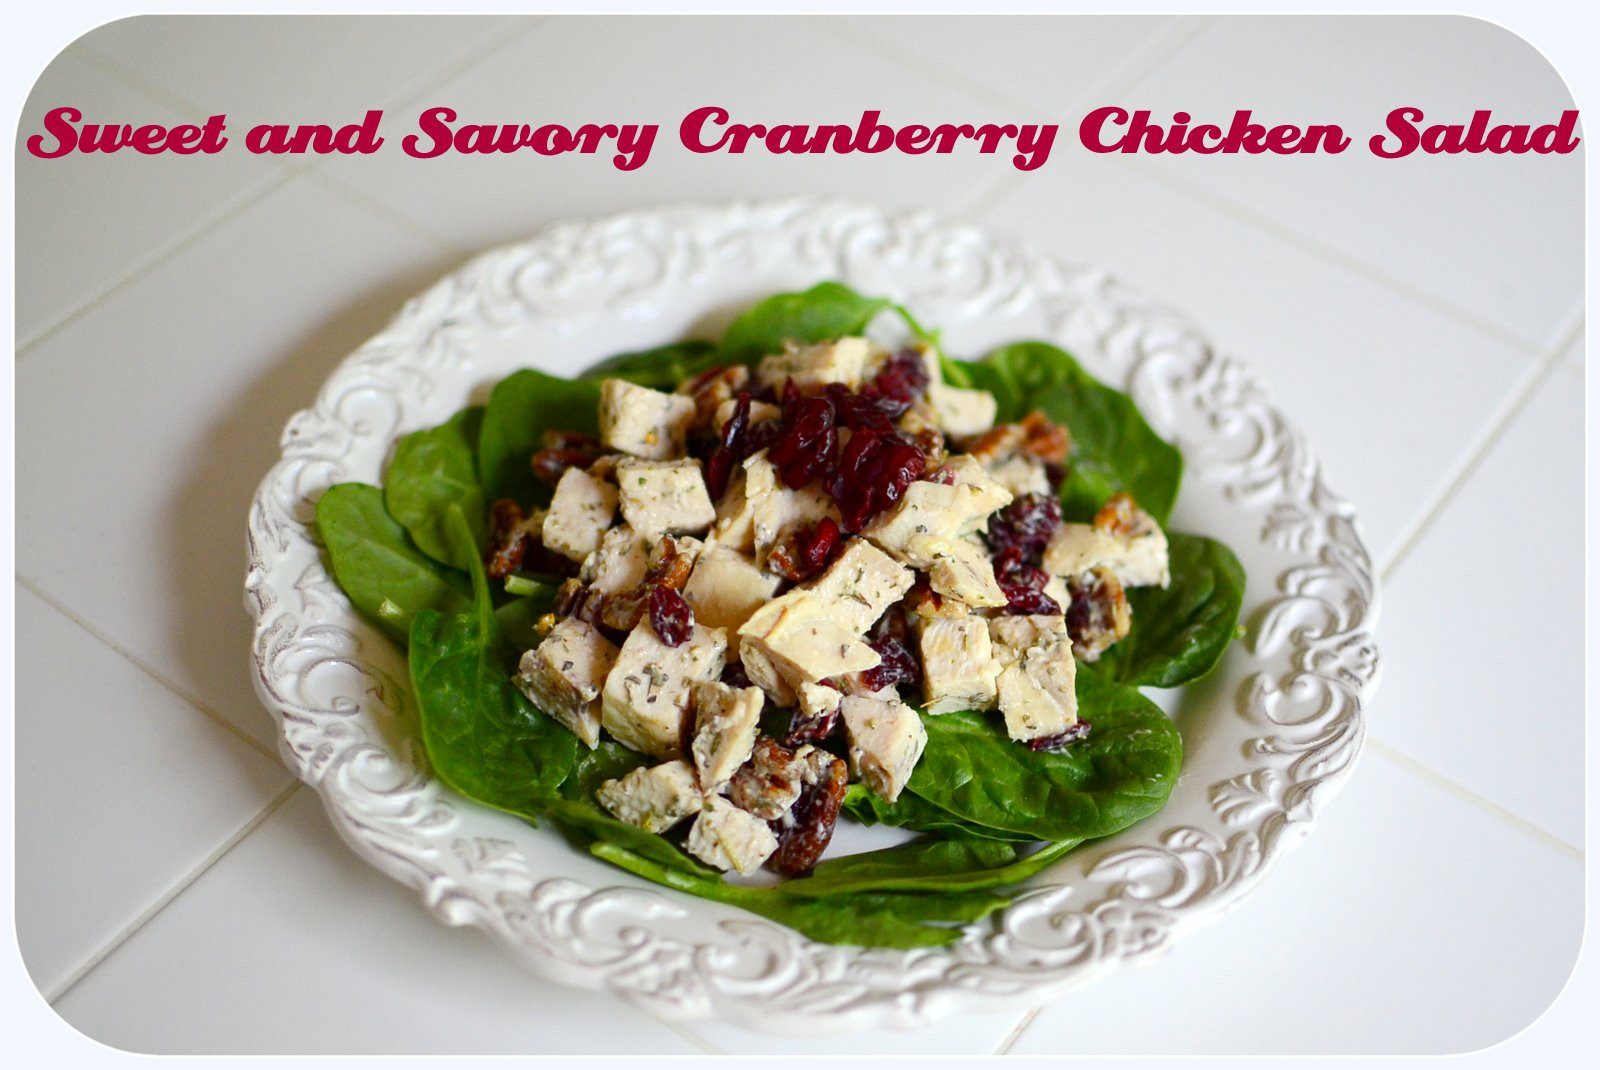 Savory Chicken Salad
 Jane of all Trades Sweet and Savory Cranberry Chicken Salad